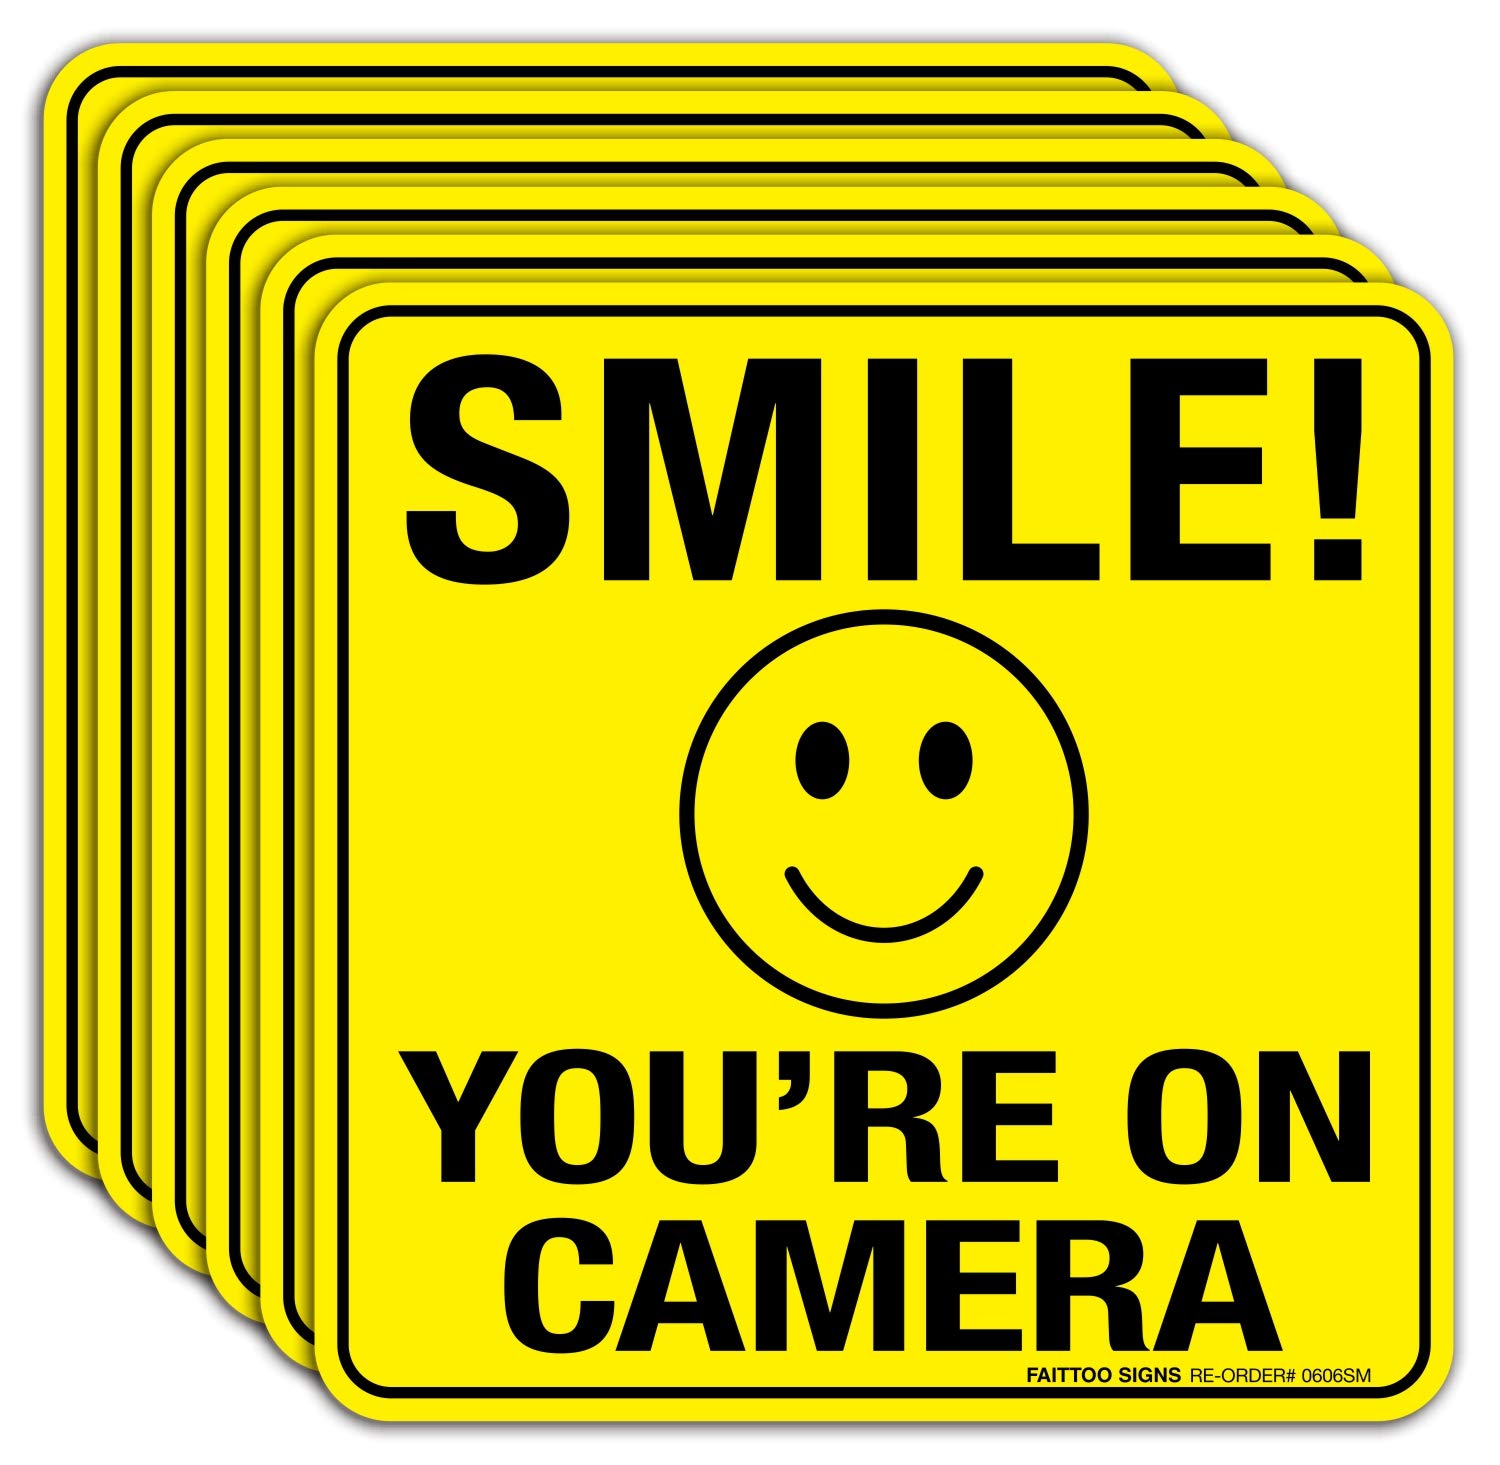 Smile You're On Camera Sign Stickers 6 Pack - 6 x 6 Inches- 4 Mil Vinyl - Laminated for Ultimate UV, Weather, Scratch, Water and Fade Resistance - Easy To Stick - Use for CCTV Security Camera